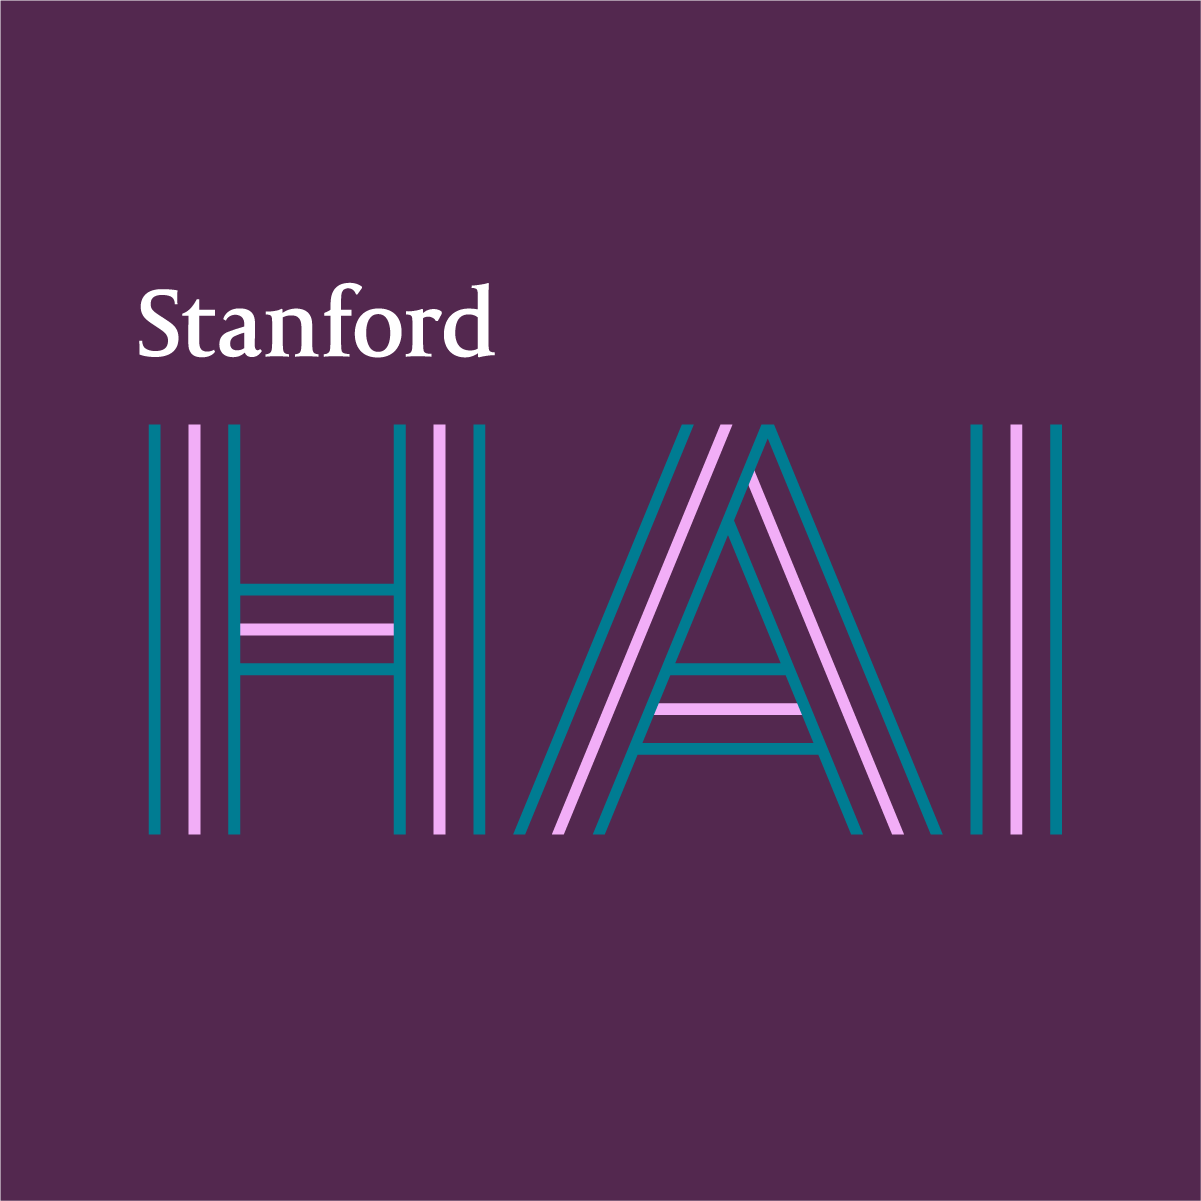 Stanford Human-Centered Artificial Intelligence Logo 2022